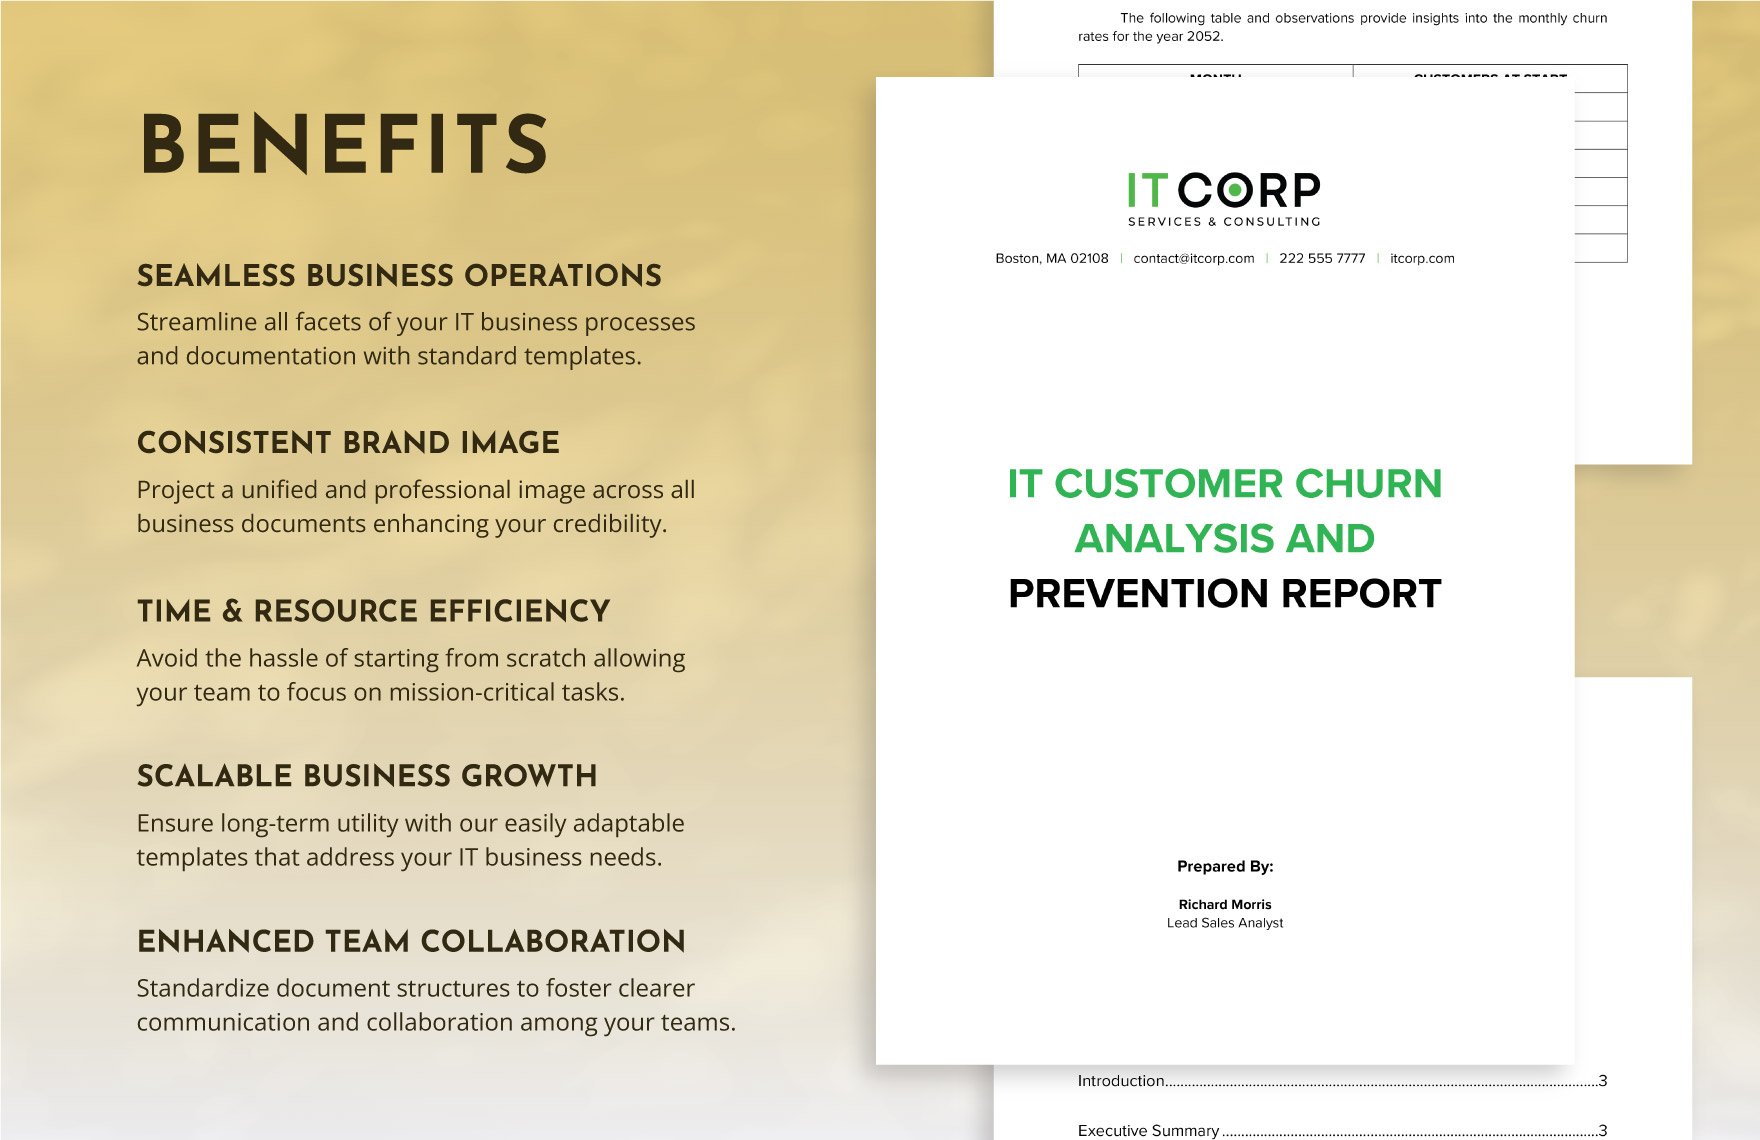 IT Customer Churn Analysis and Prevention Report Template